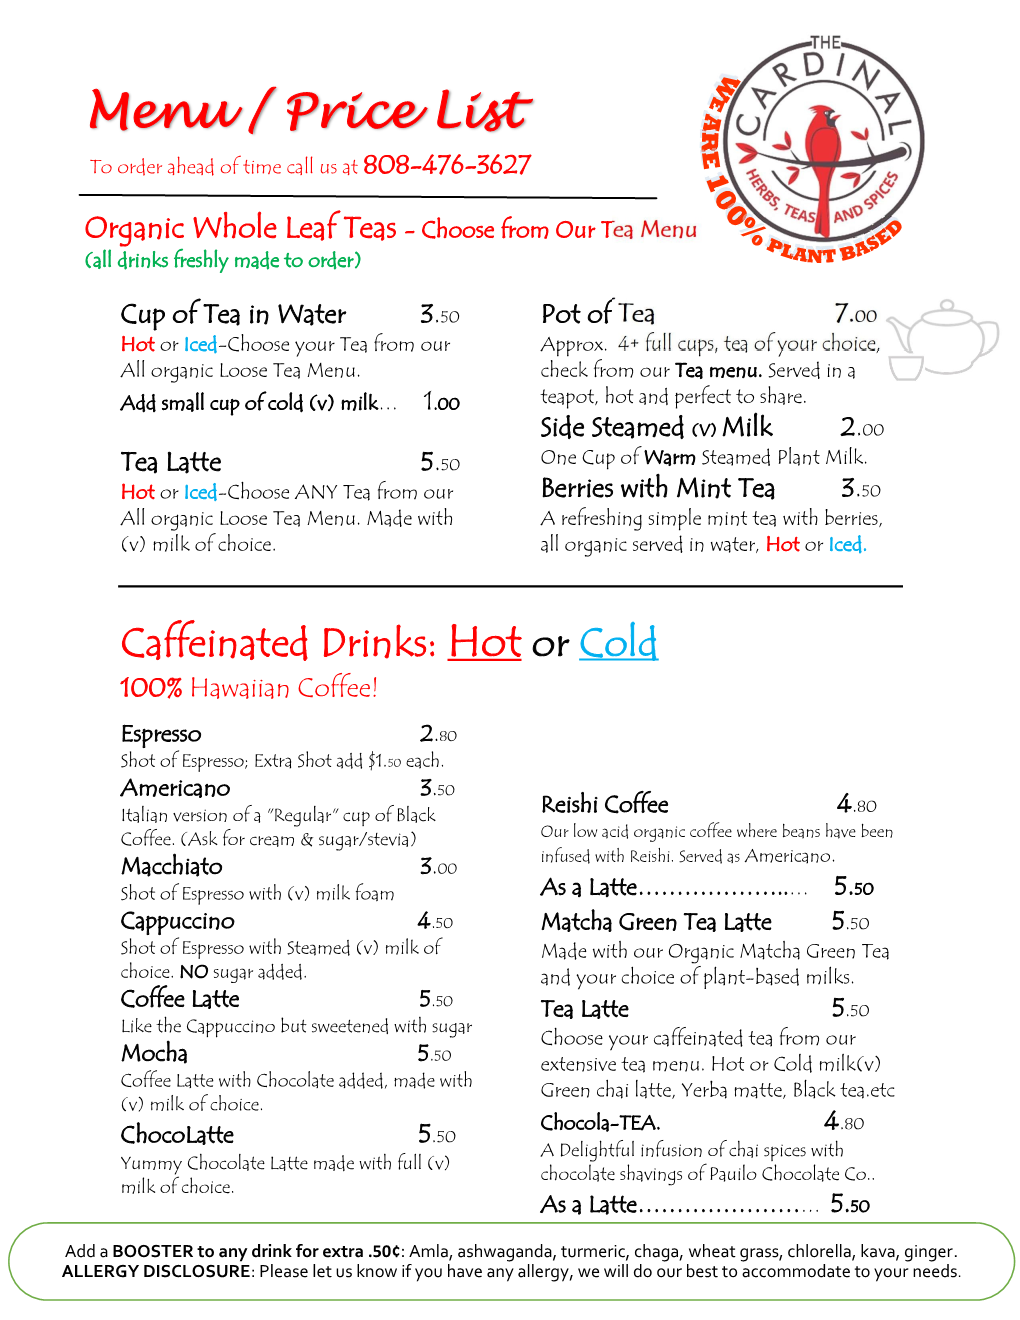 Menu / Price List to Order Ahead of Time Call Us at 808-476-3627